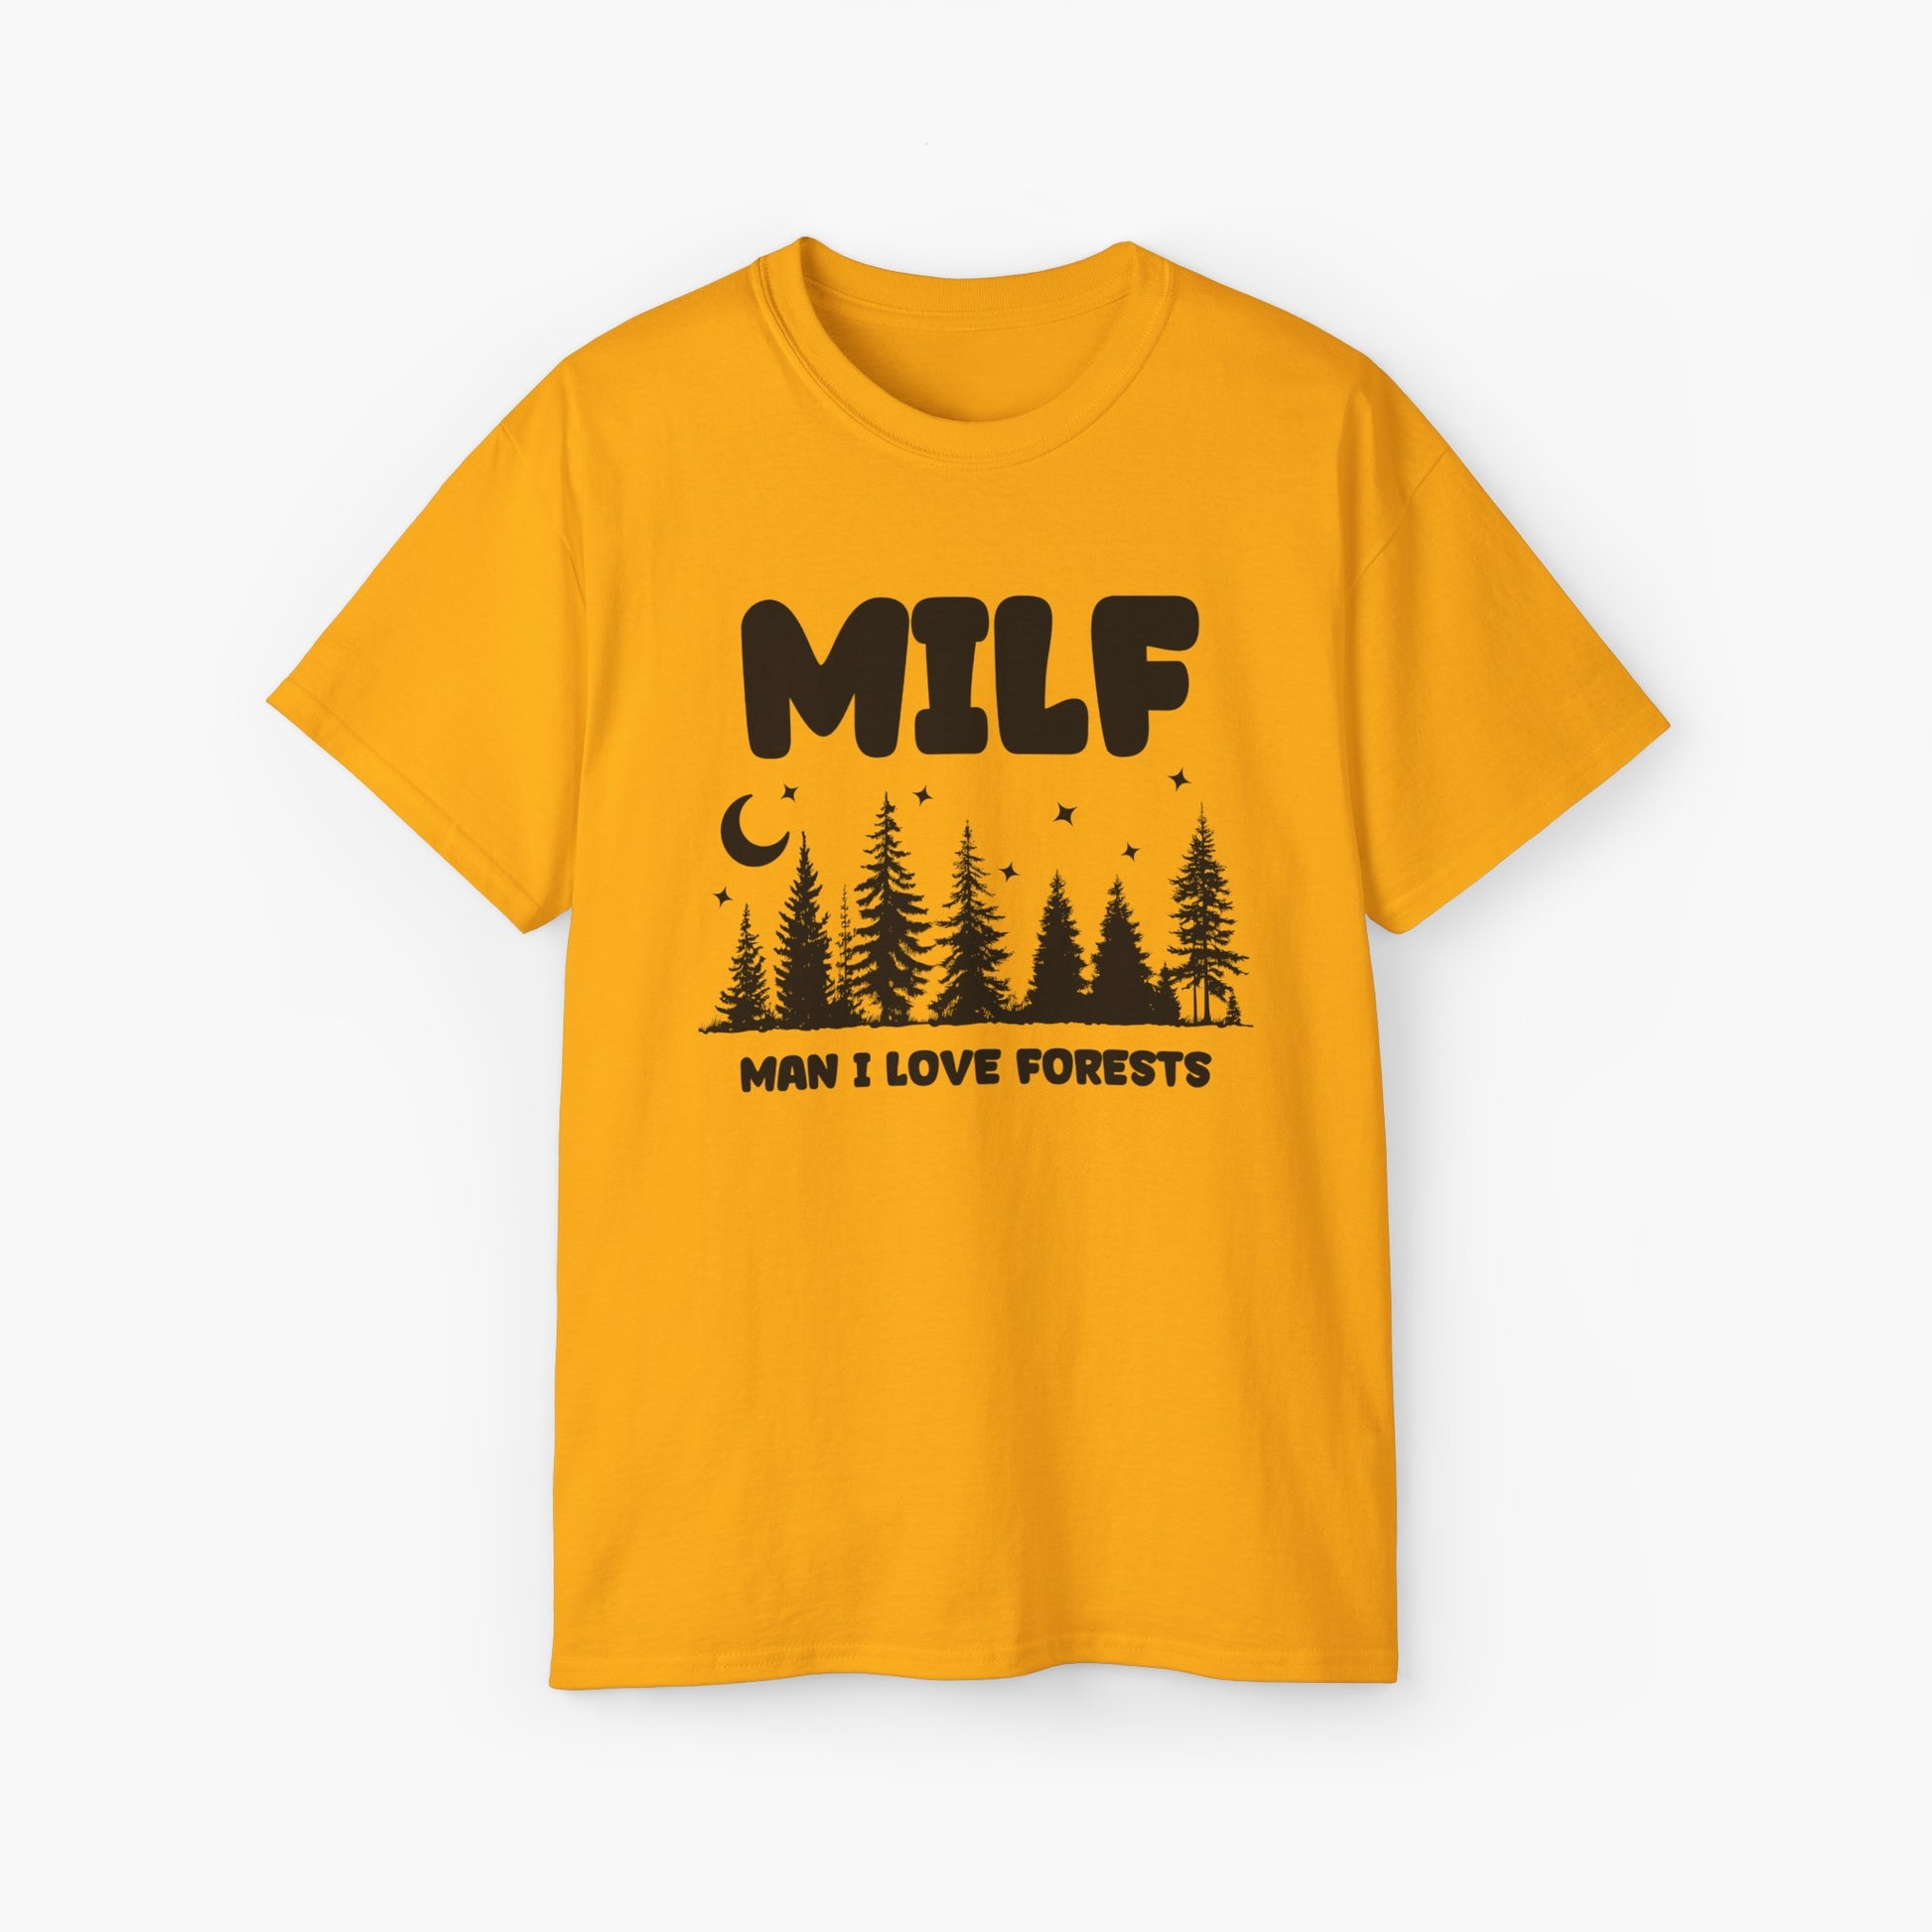 Yellow t-shirt with the text 'MILF, Man I Love Forests,' featuring trees, stars, and a moon on a plain background.